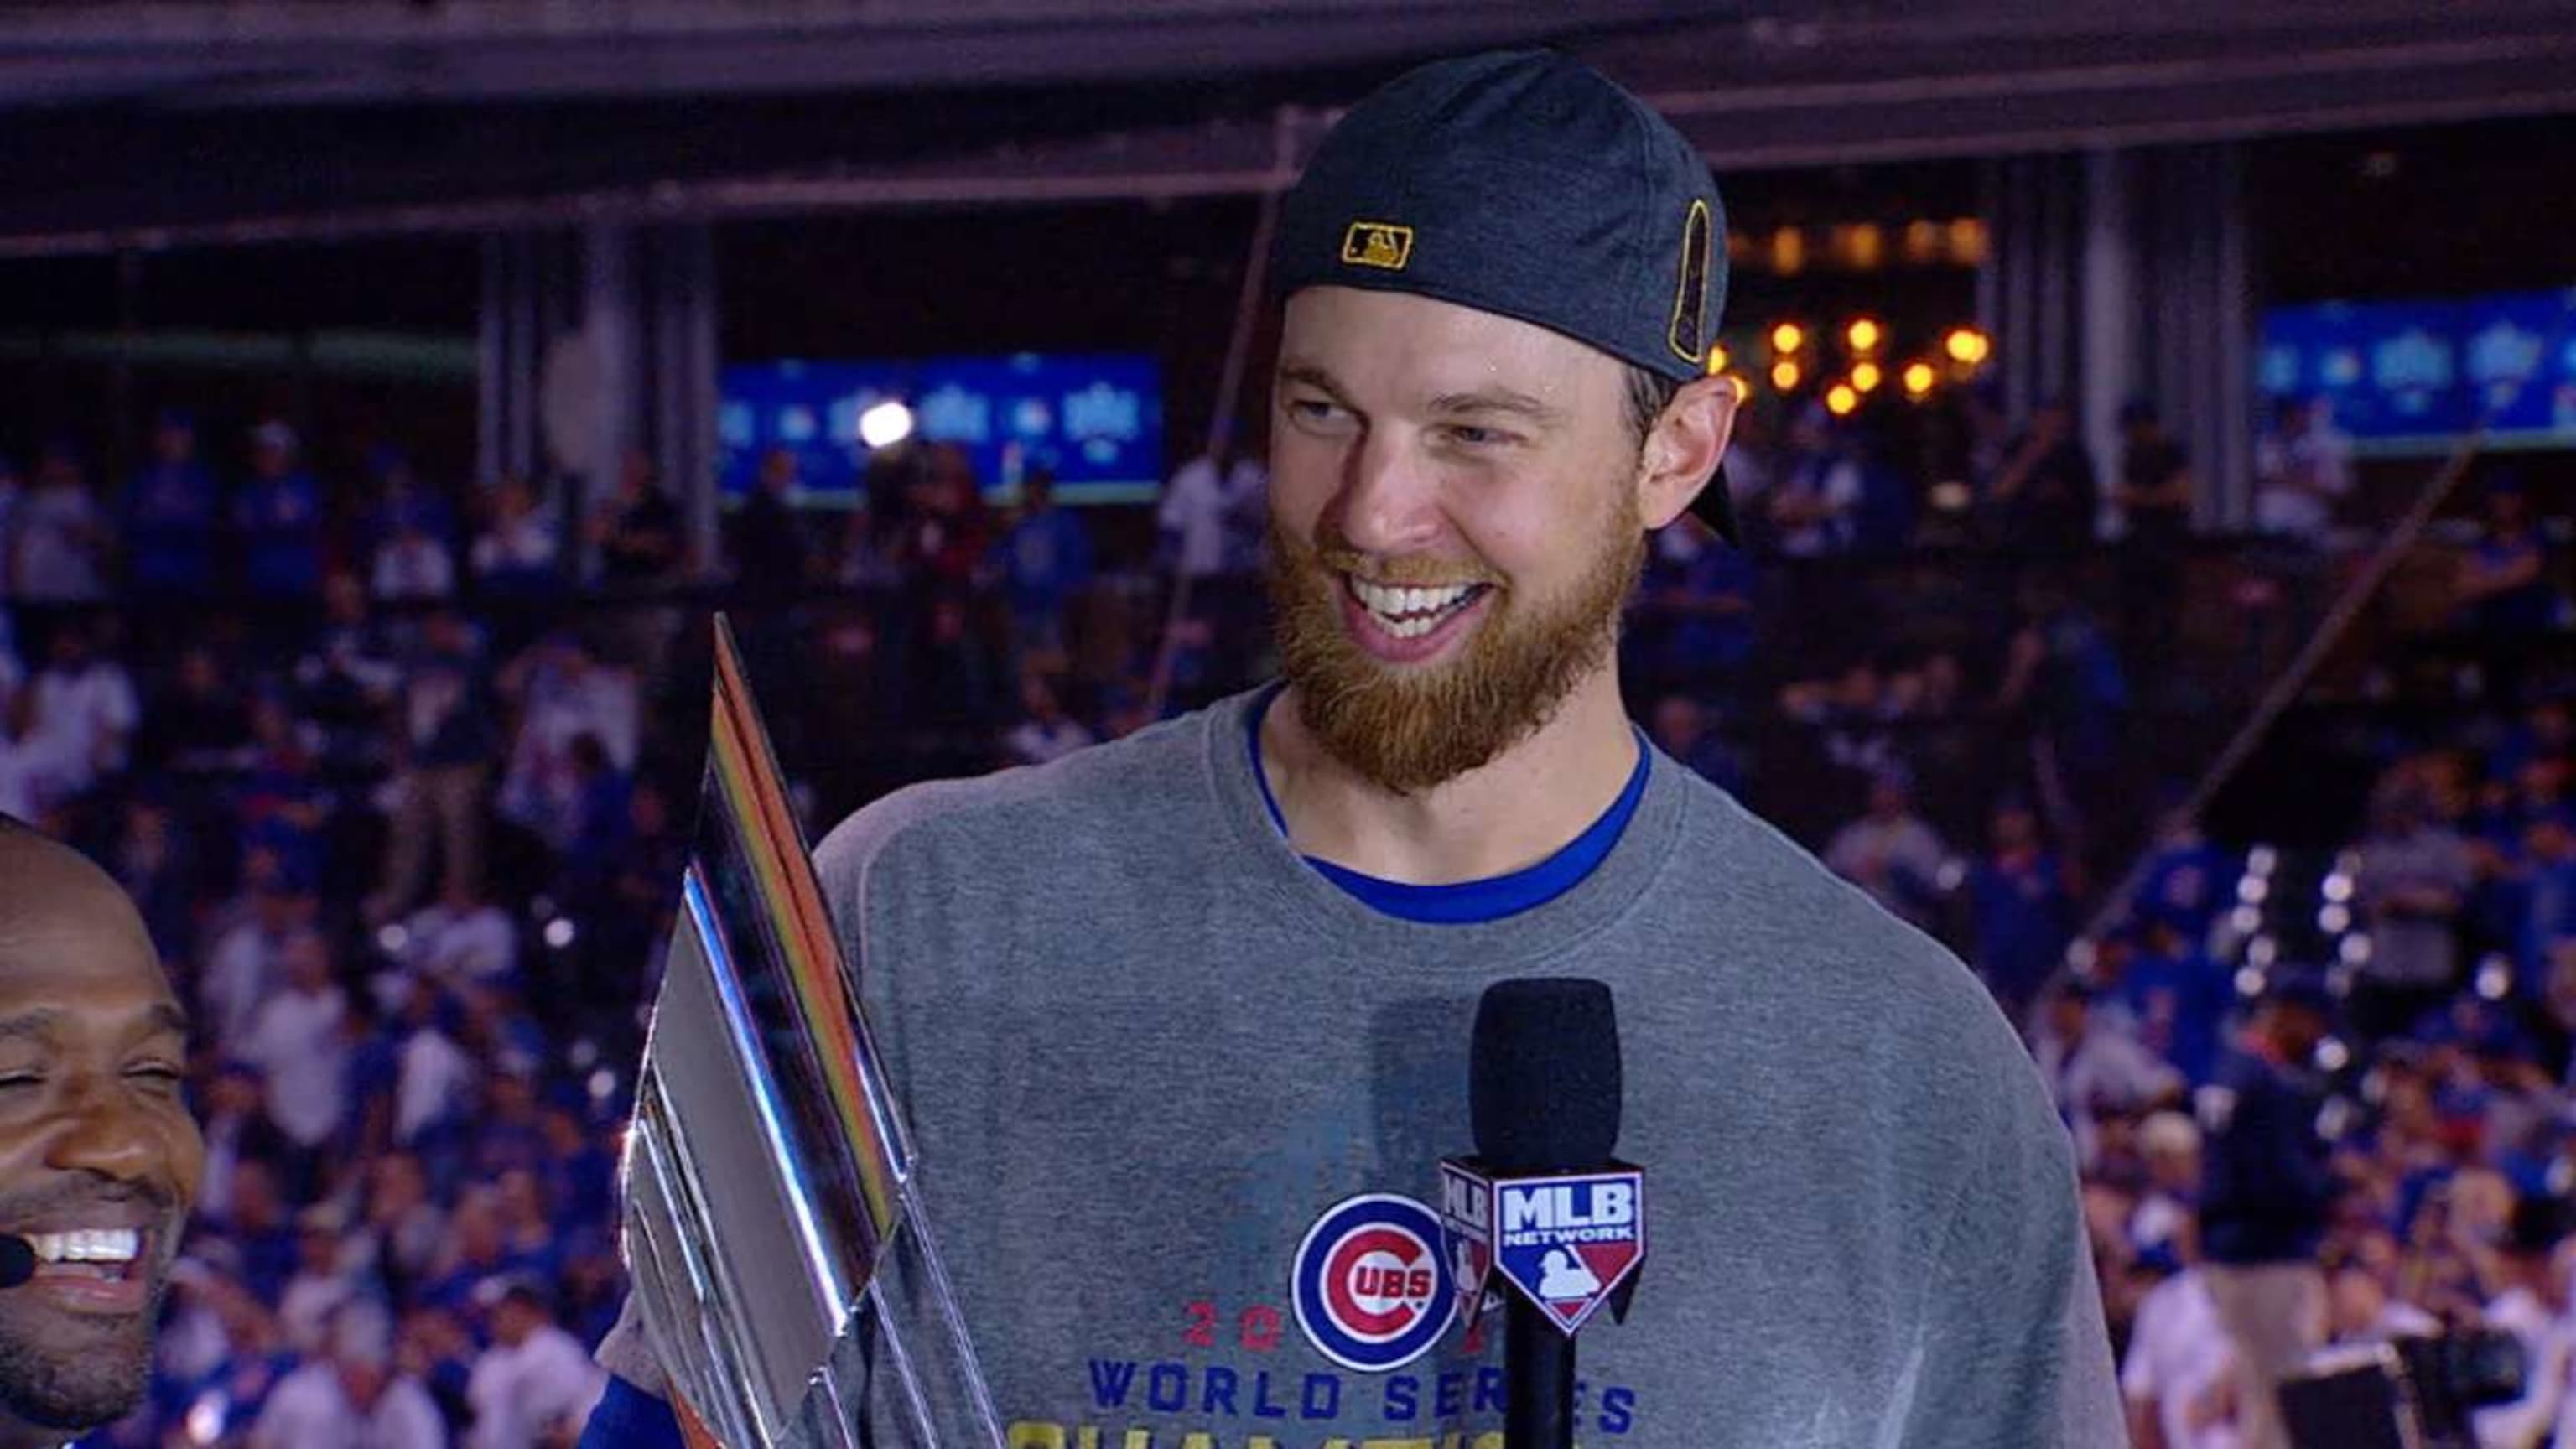 Ben Zobrist, World Series hero for the Cubs, sues former pastor